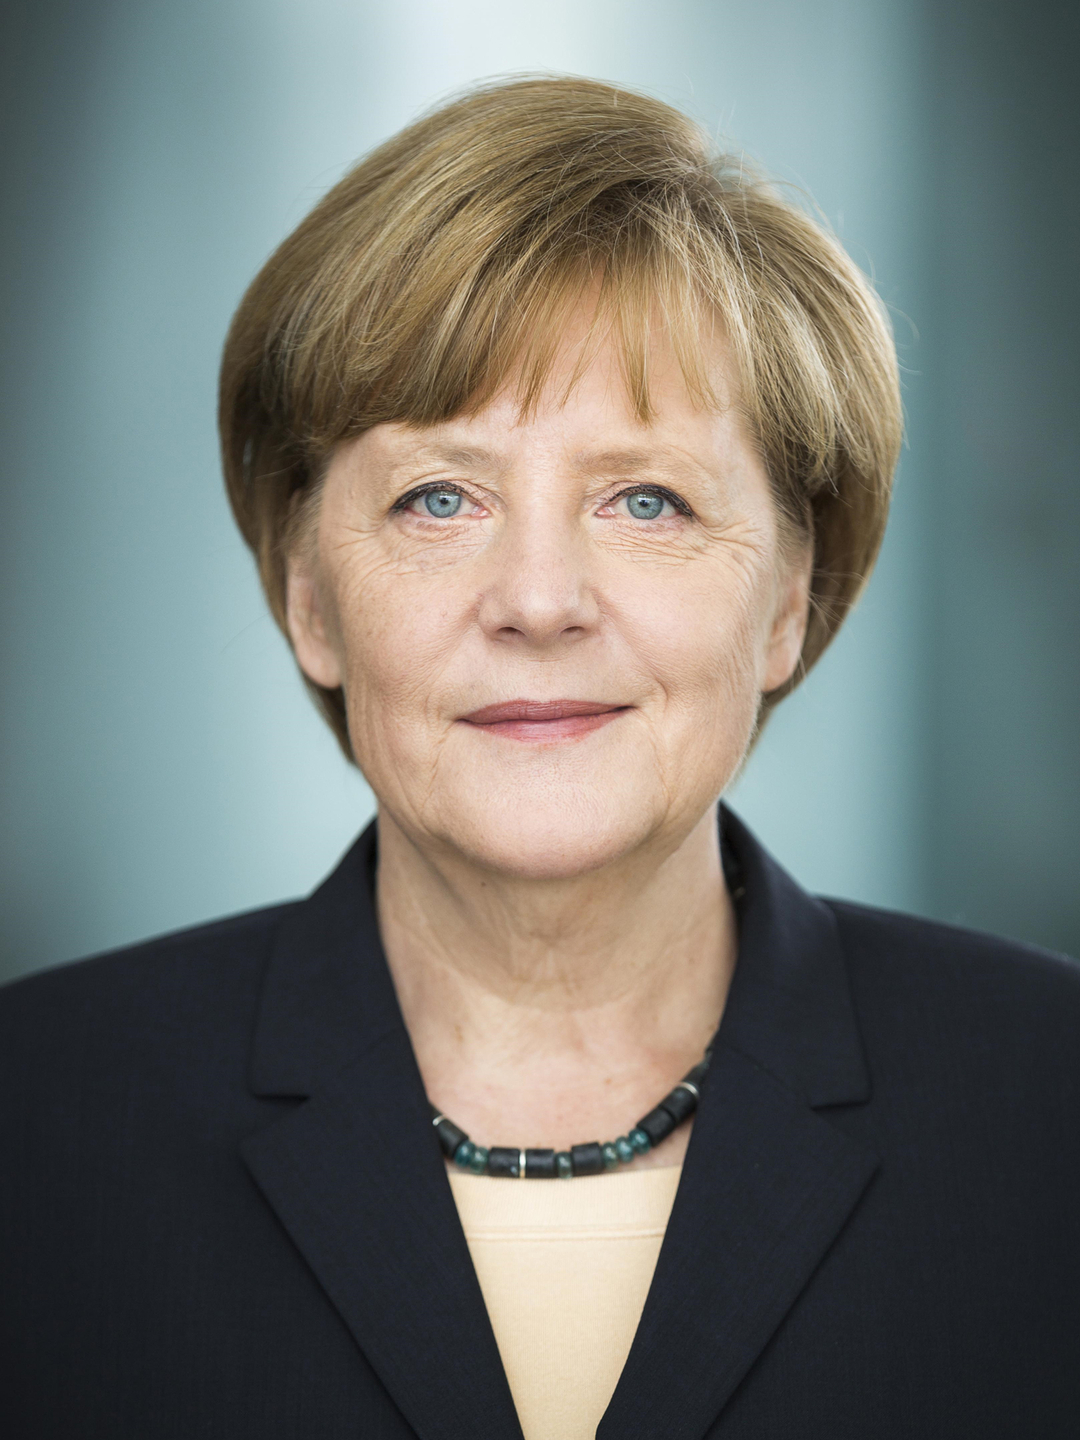 Angela Merkel who is her father